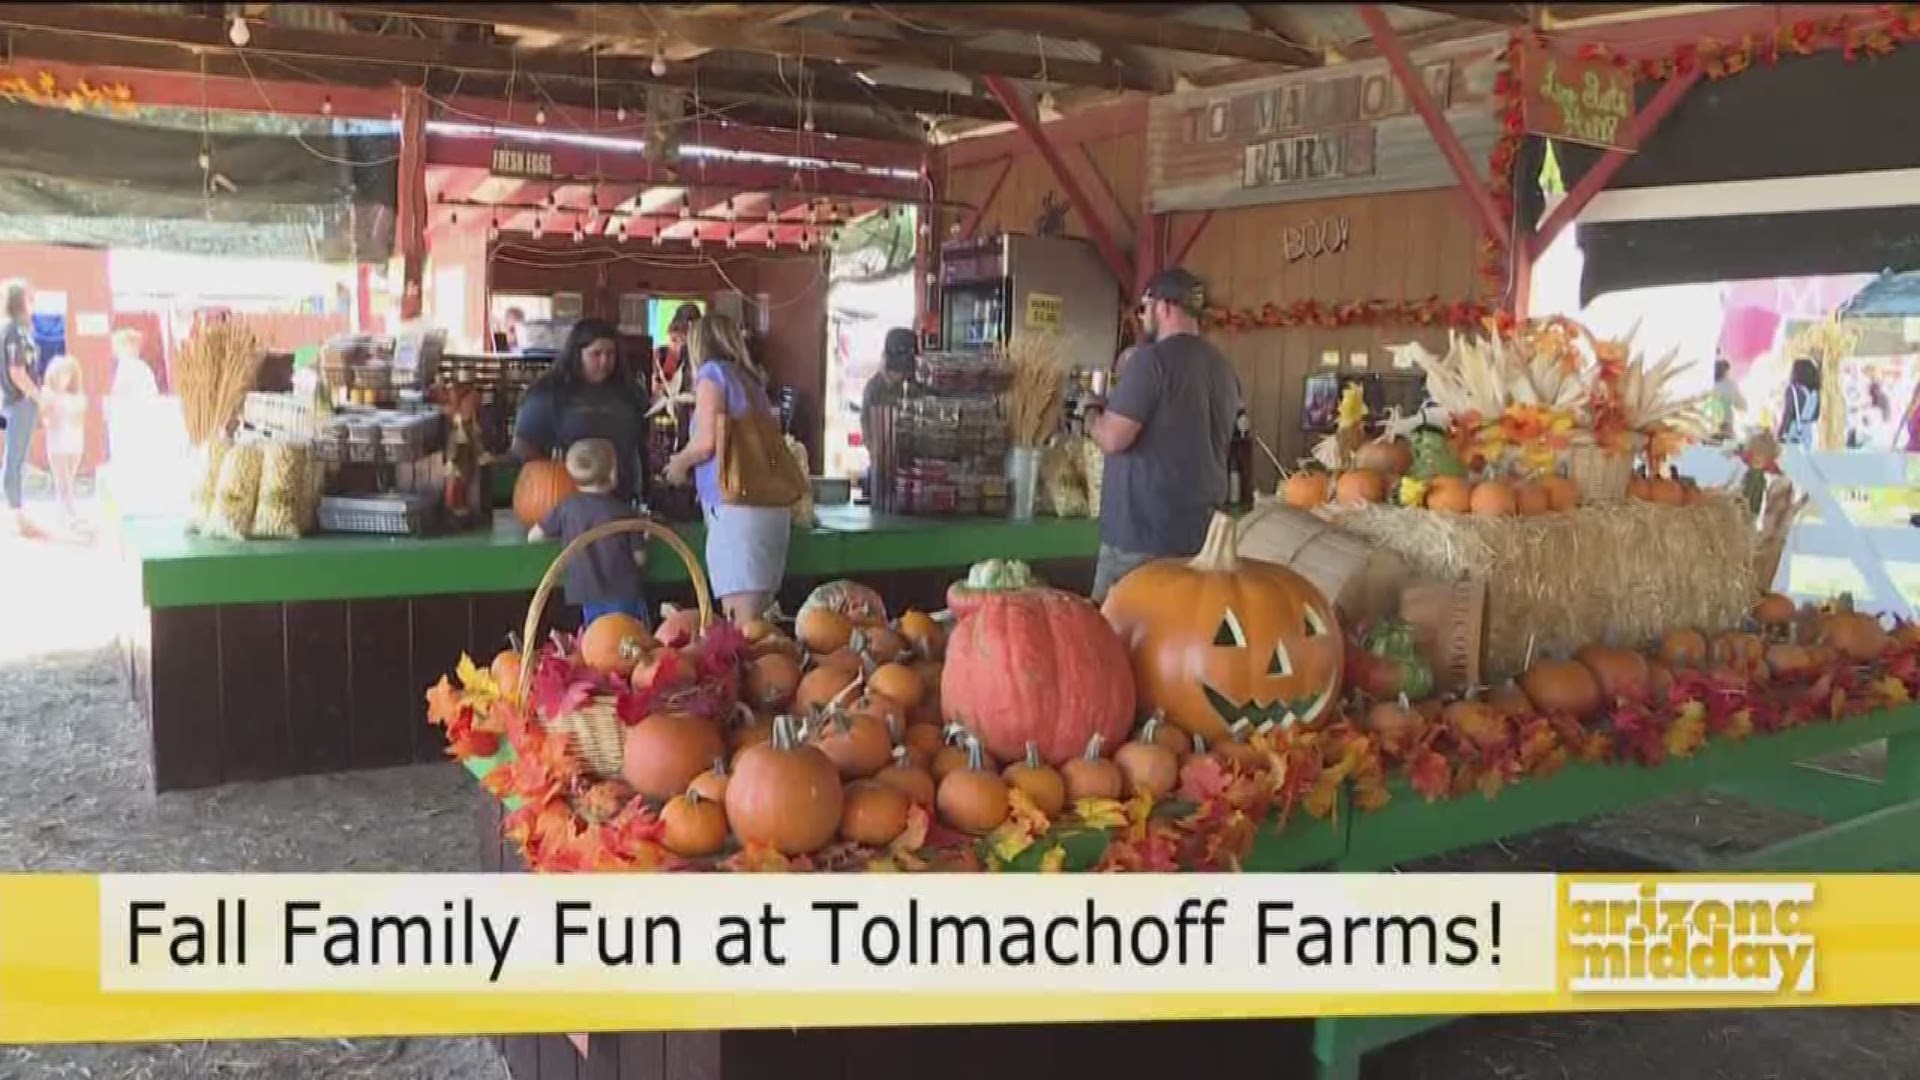 Pumpkin patches, hayrides and more right here in the Valley! Head to Tolmachoff Farms to get the country feel right here in the city.